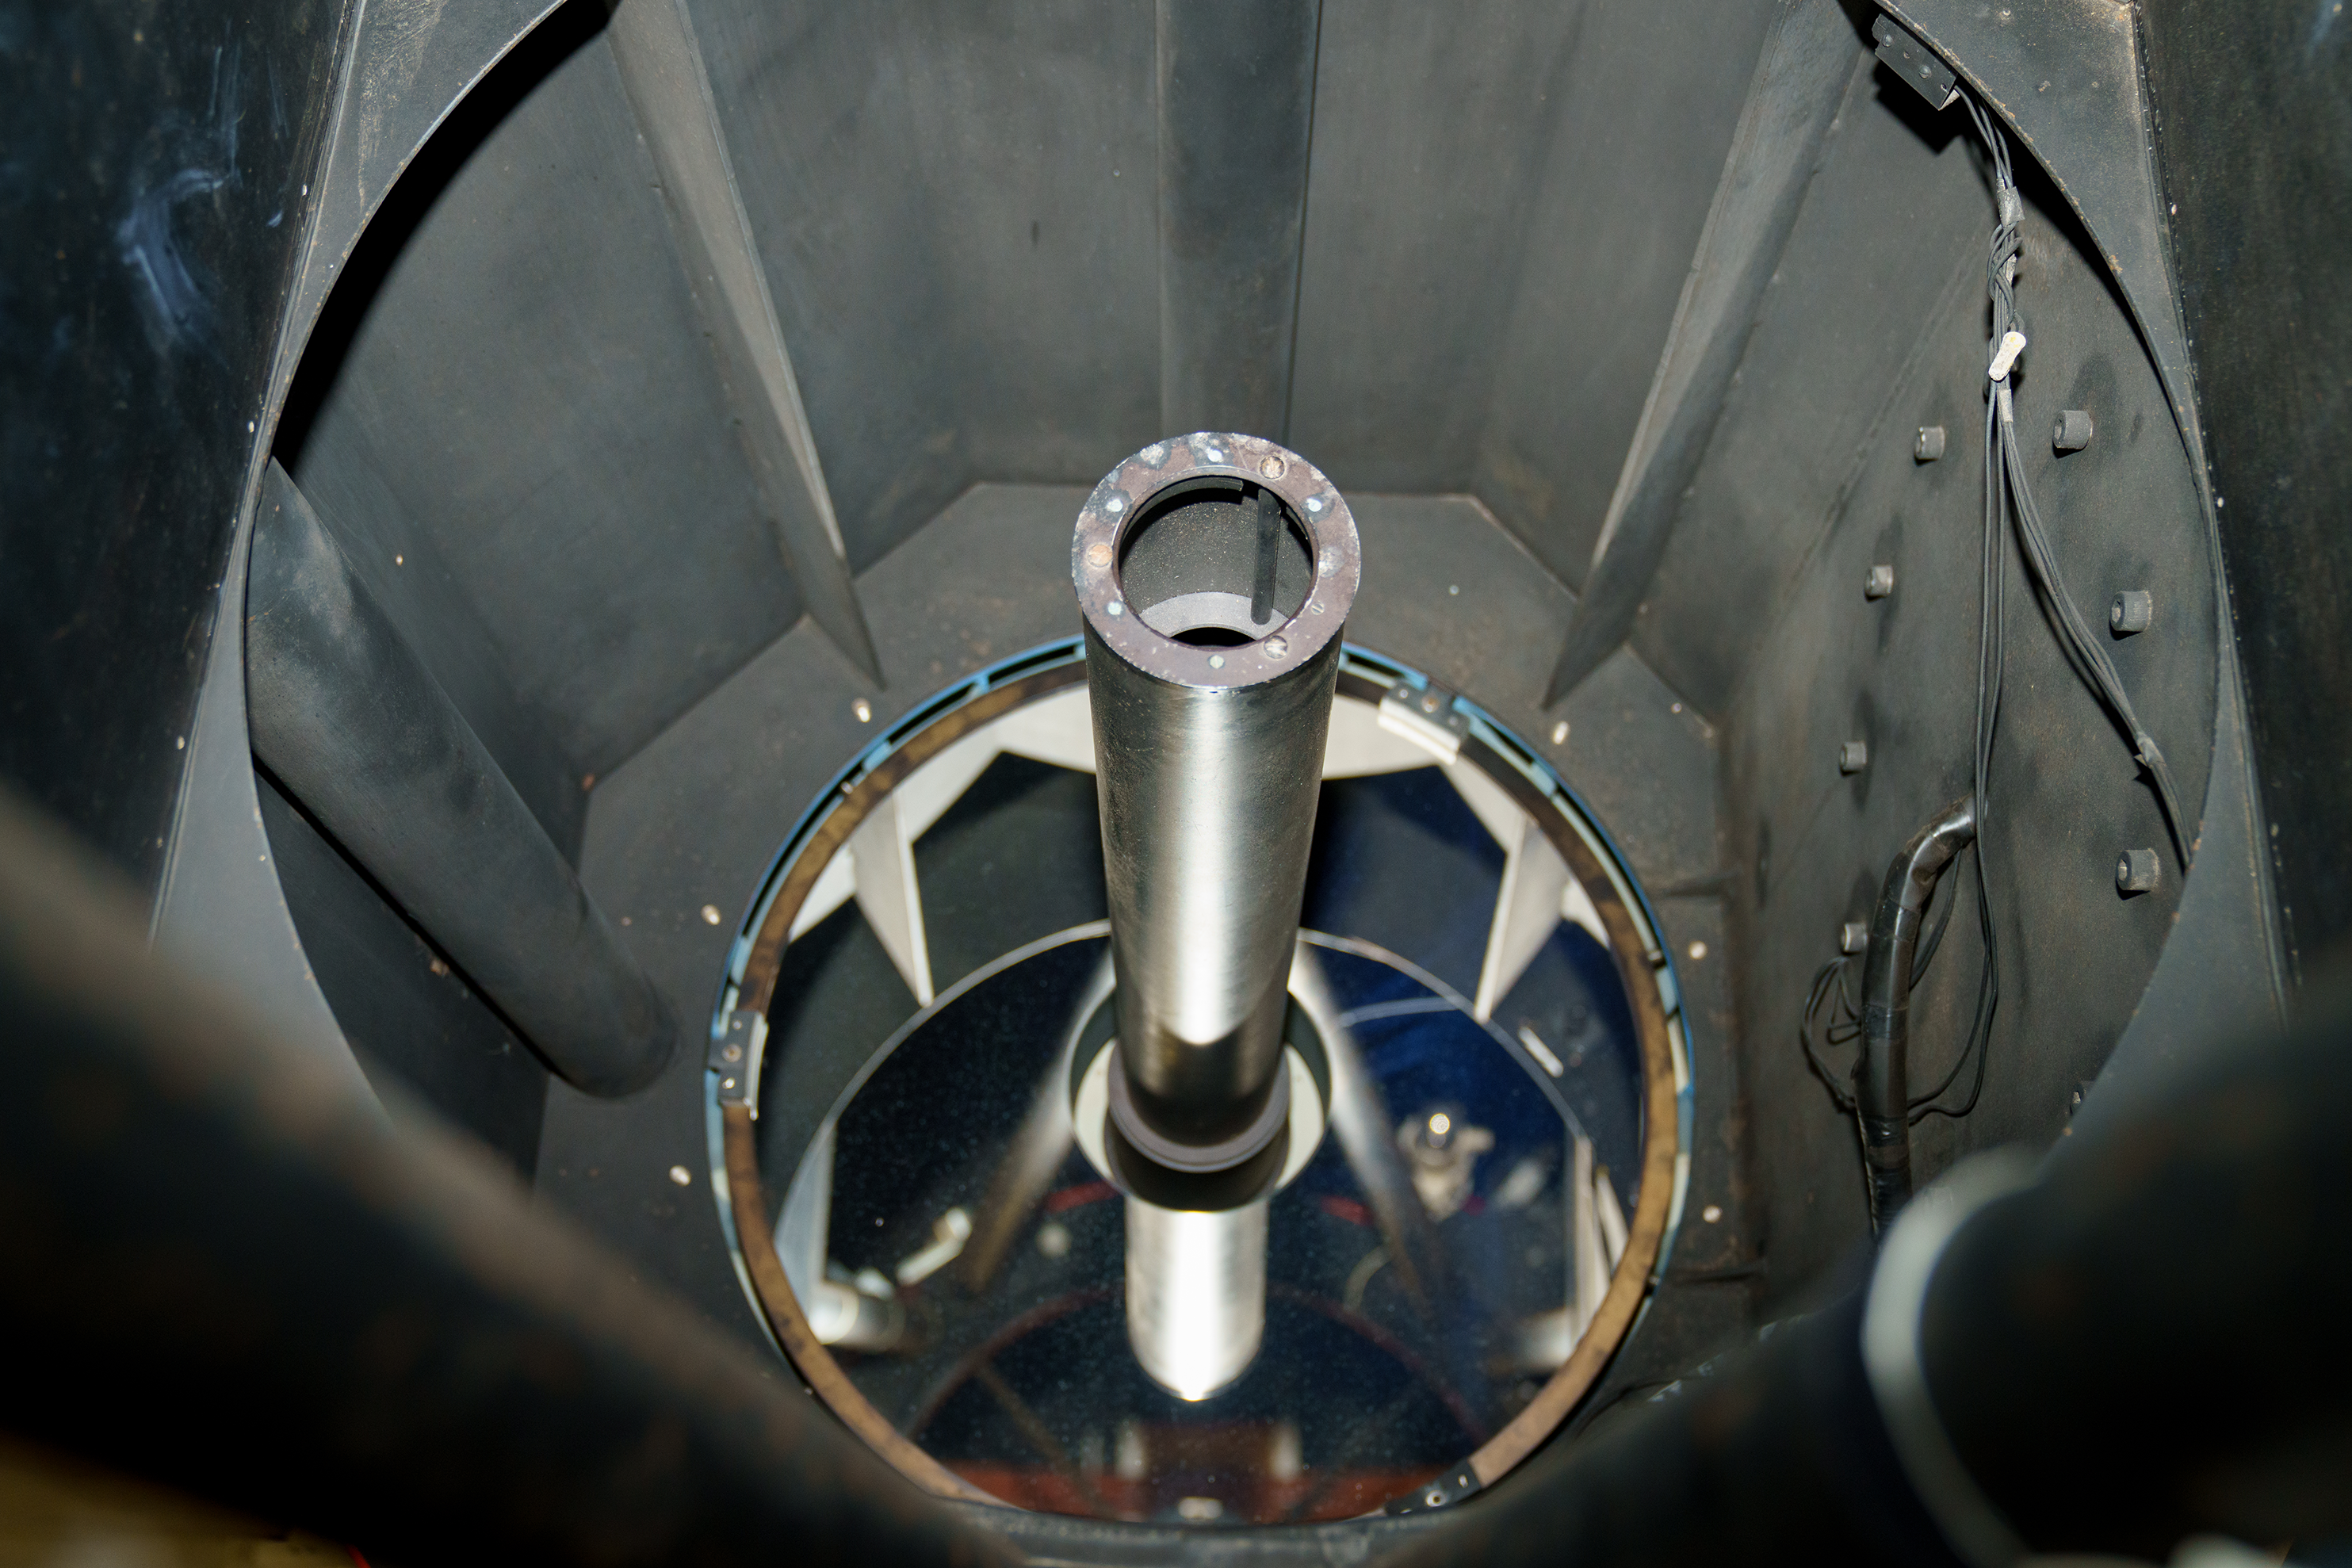 The interior of the 30-inch telescope, with a large mirror and several electrical components.